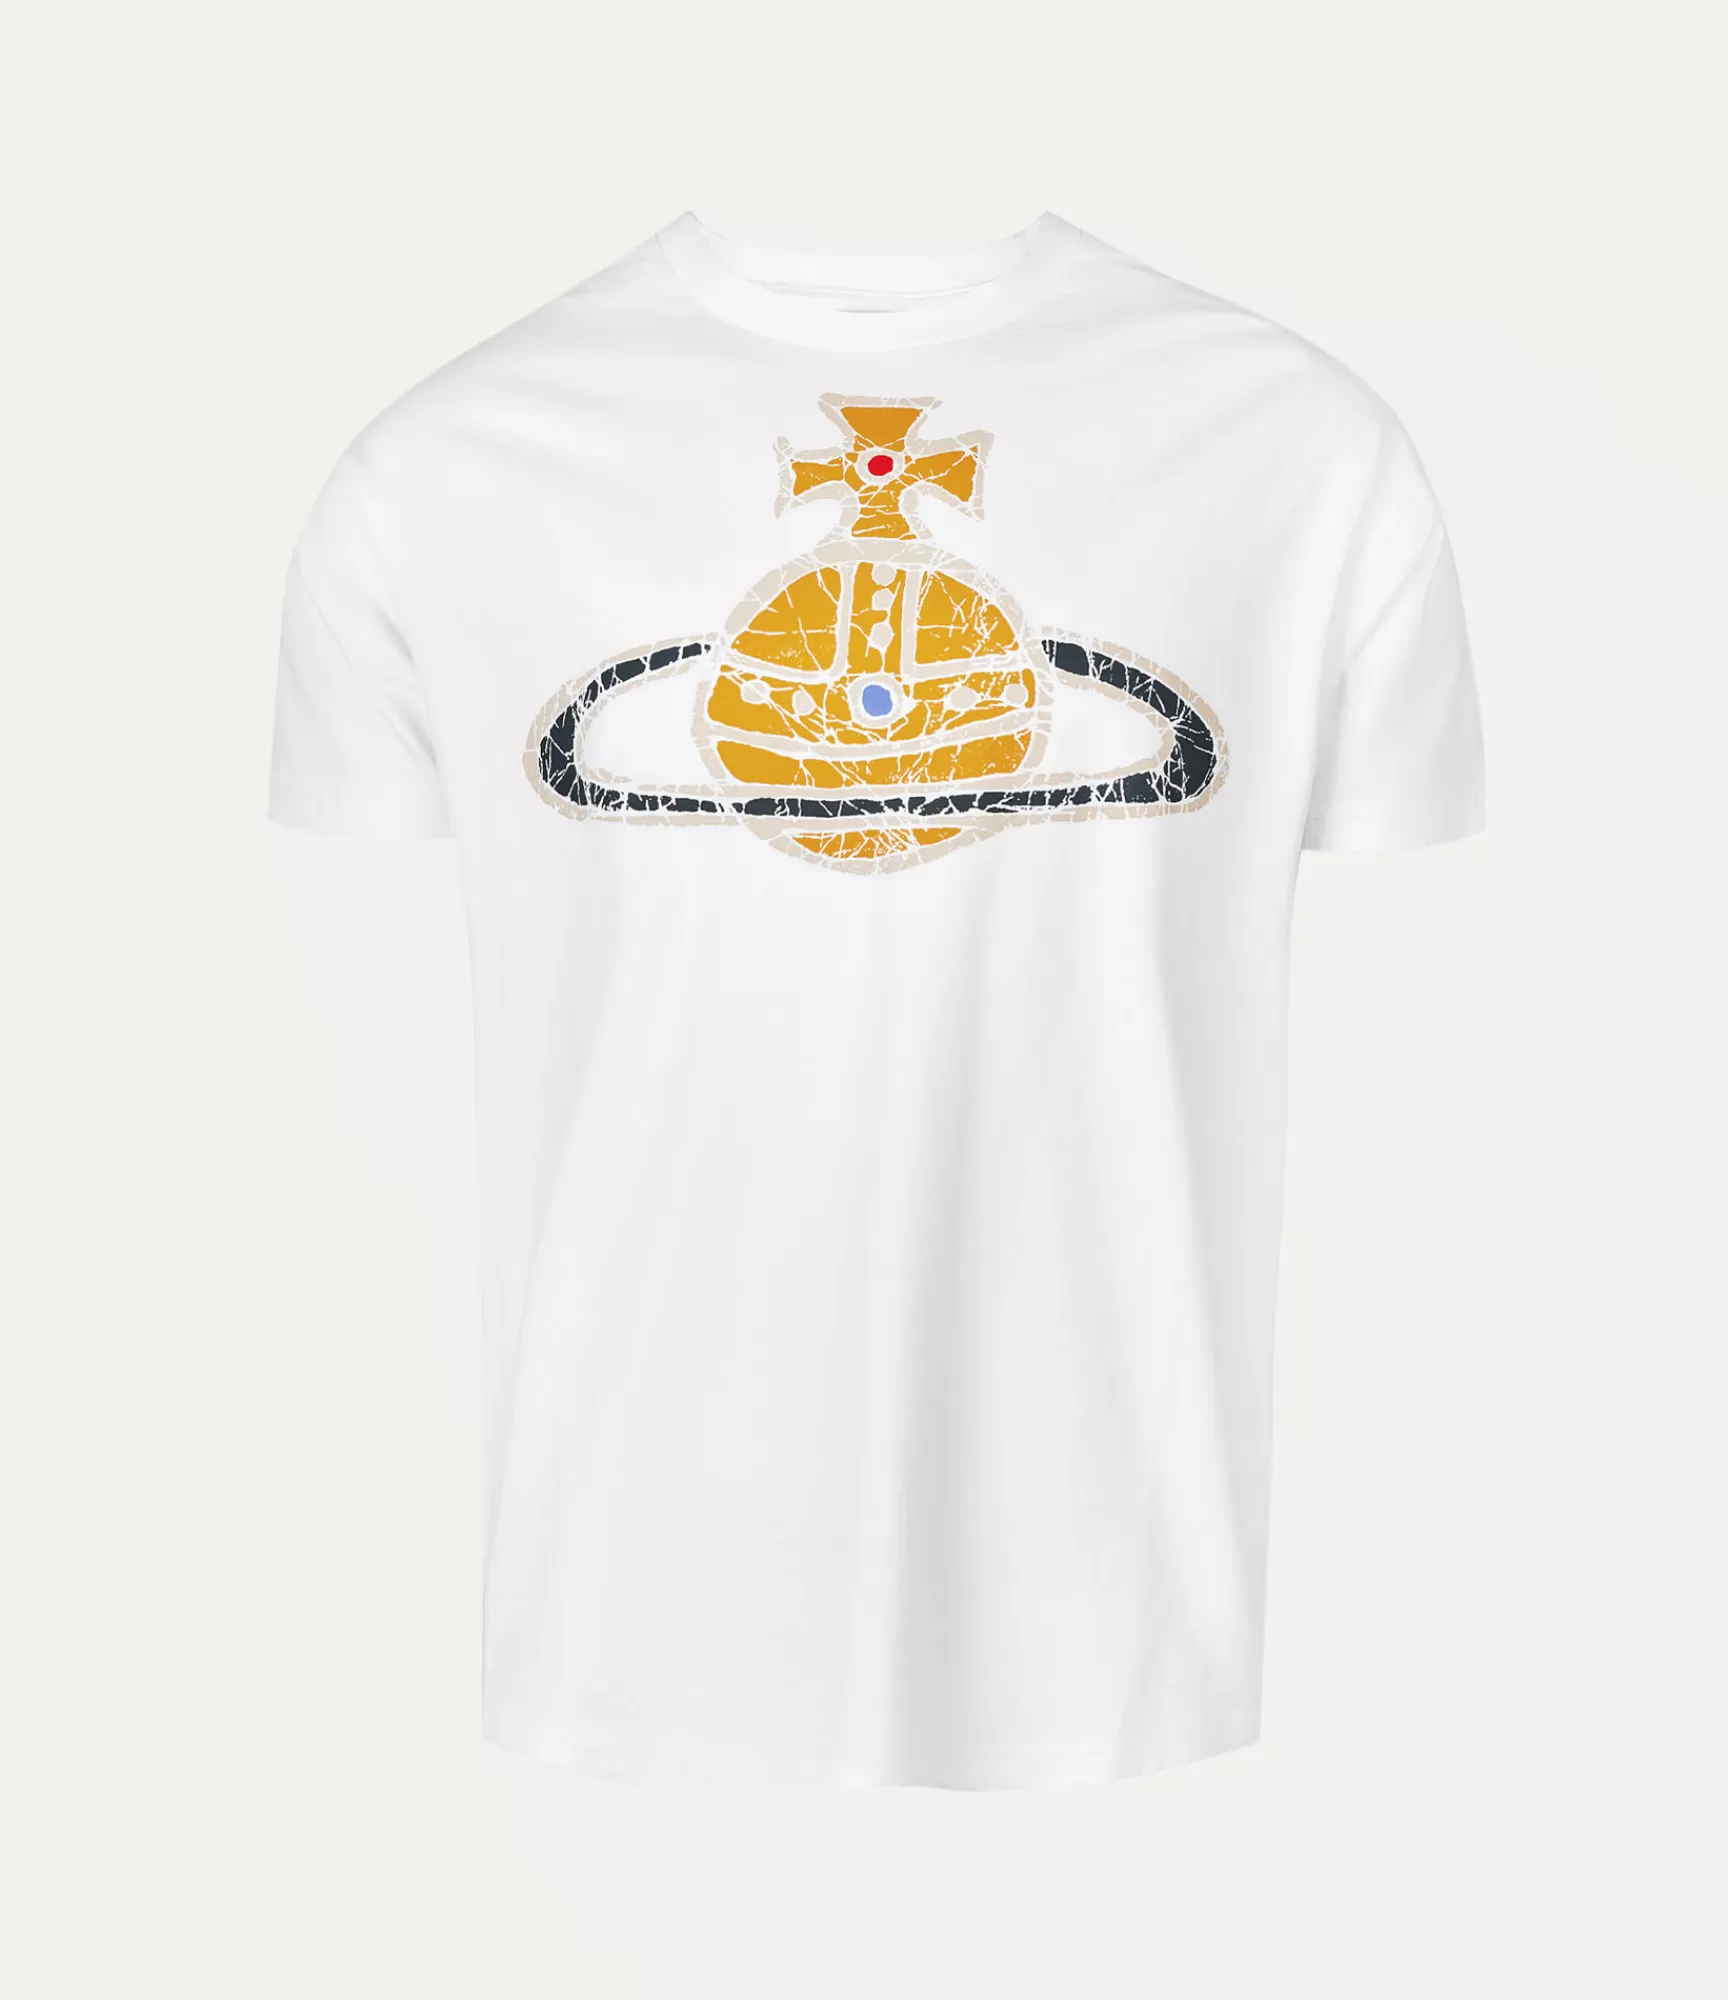 Vivienne Westwood T-Shirts and Polos | Sweatshirts and T-Shirts*Time machine classic t-shirt White